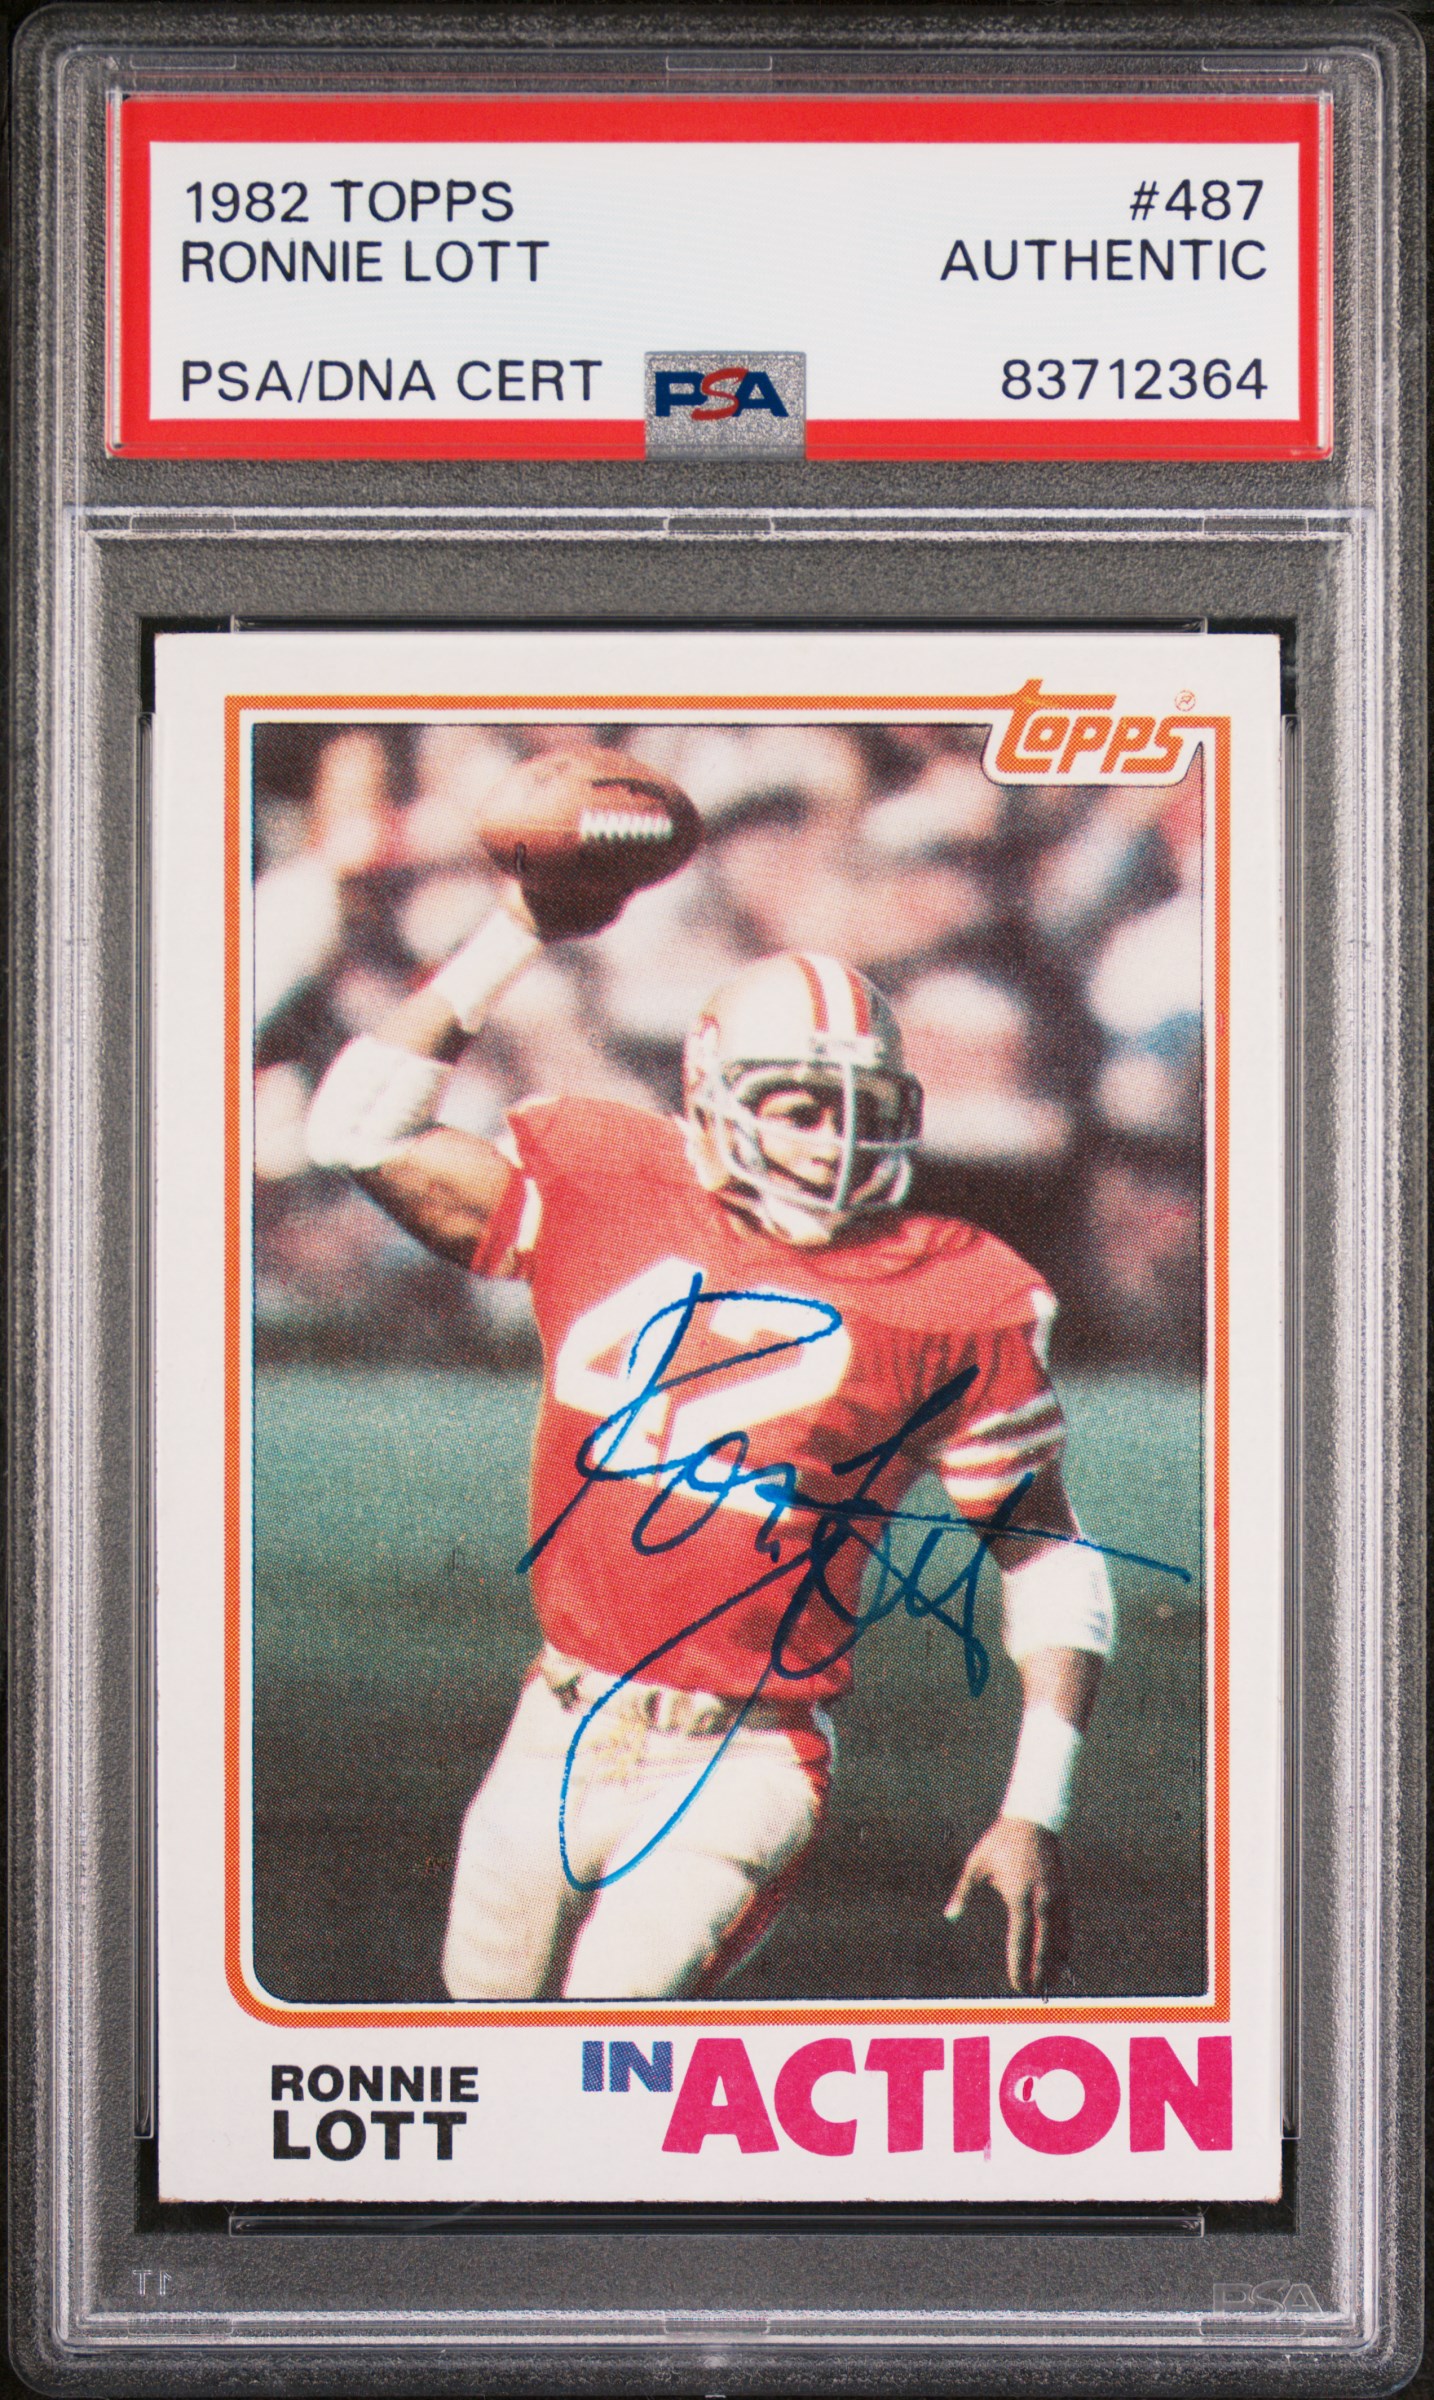 Ronnie Lott 1982 Topps Signed Football Rookie Card #487 Auto PSA